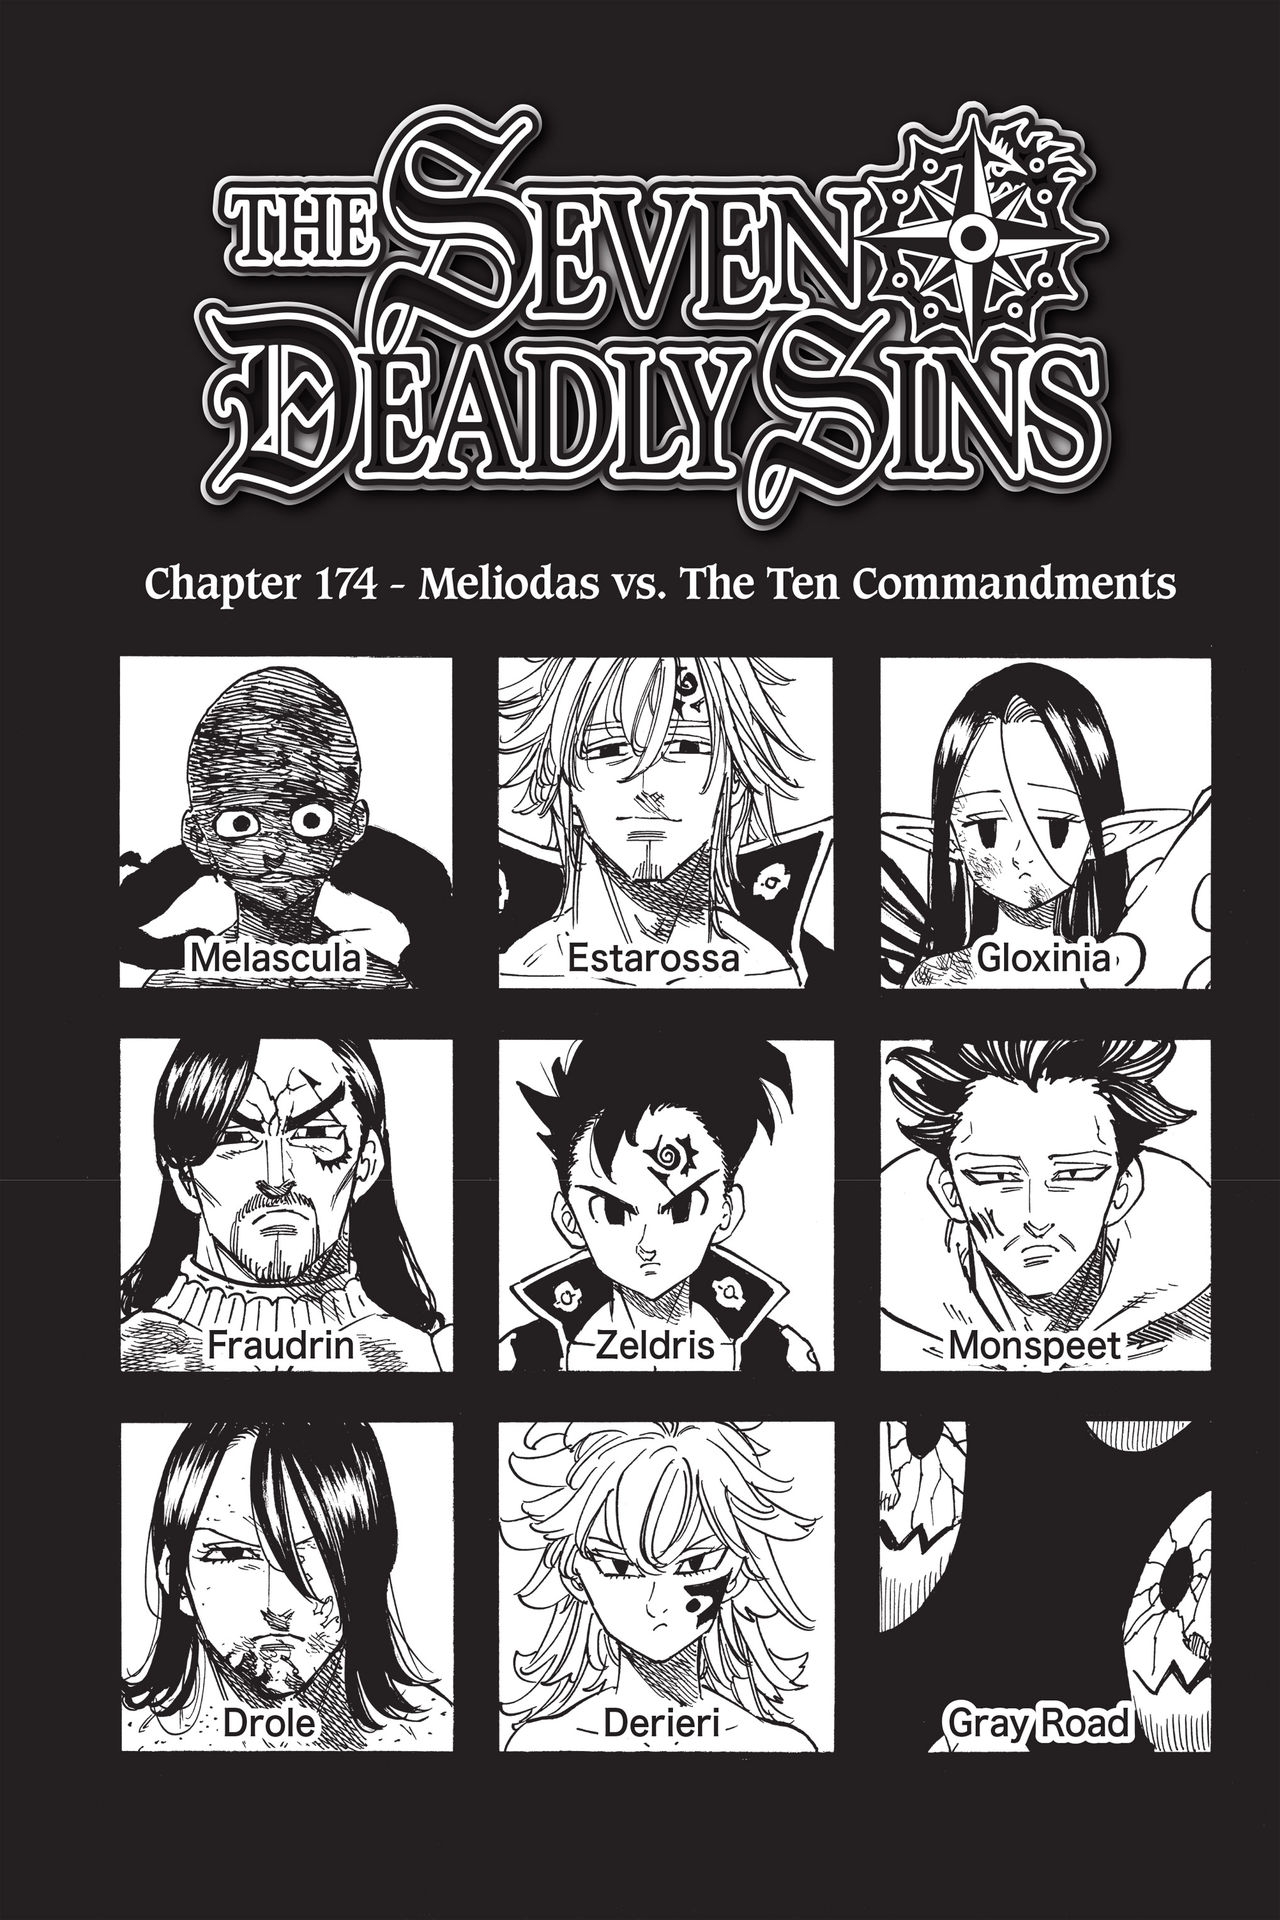 The Seven Deadly Sins (Covers & Chapter Title Cards) 381